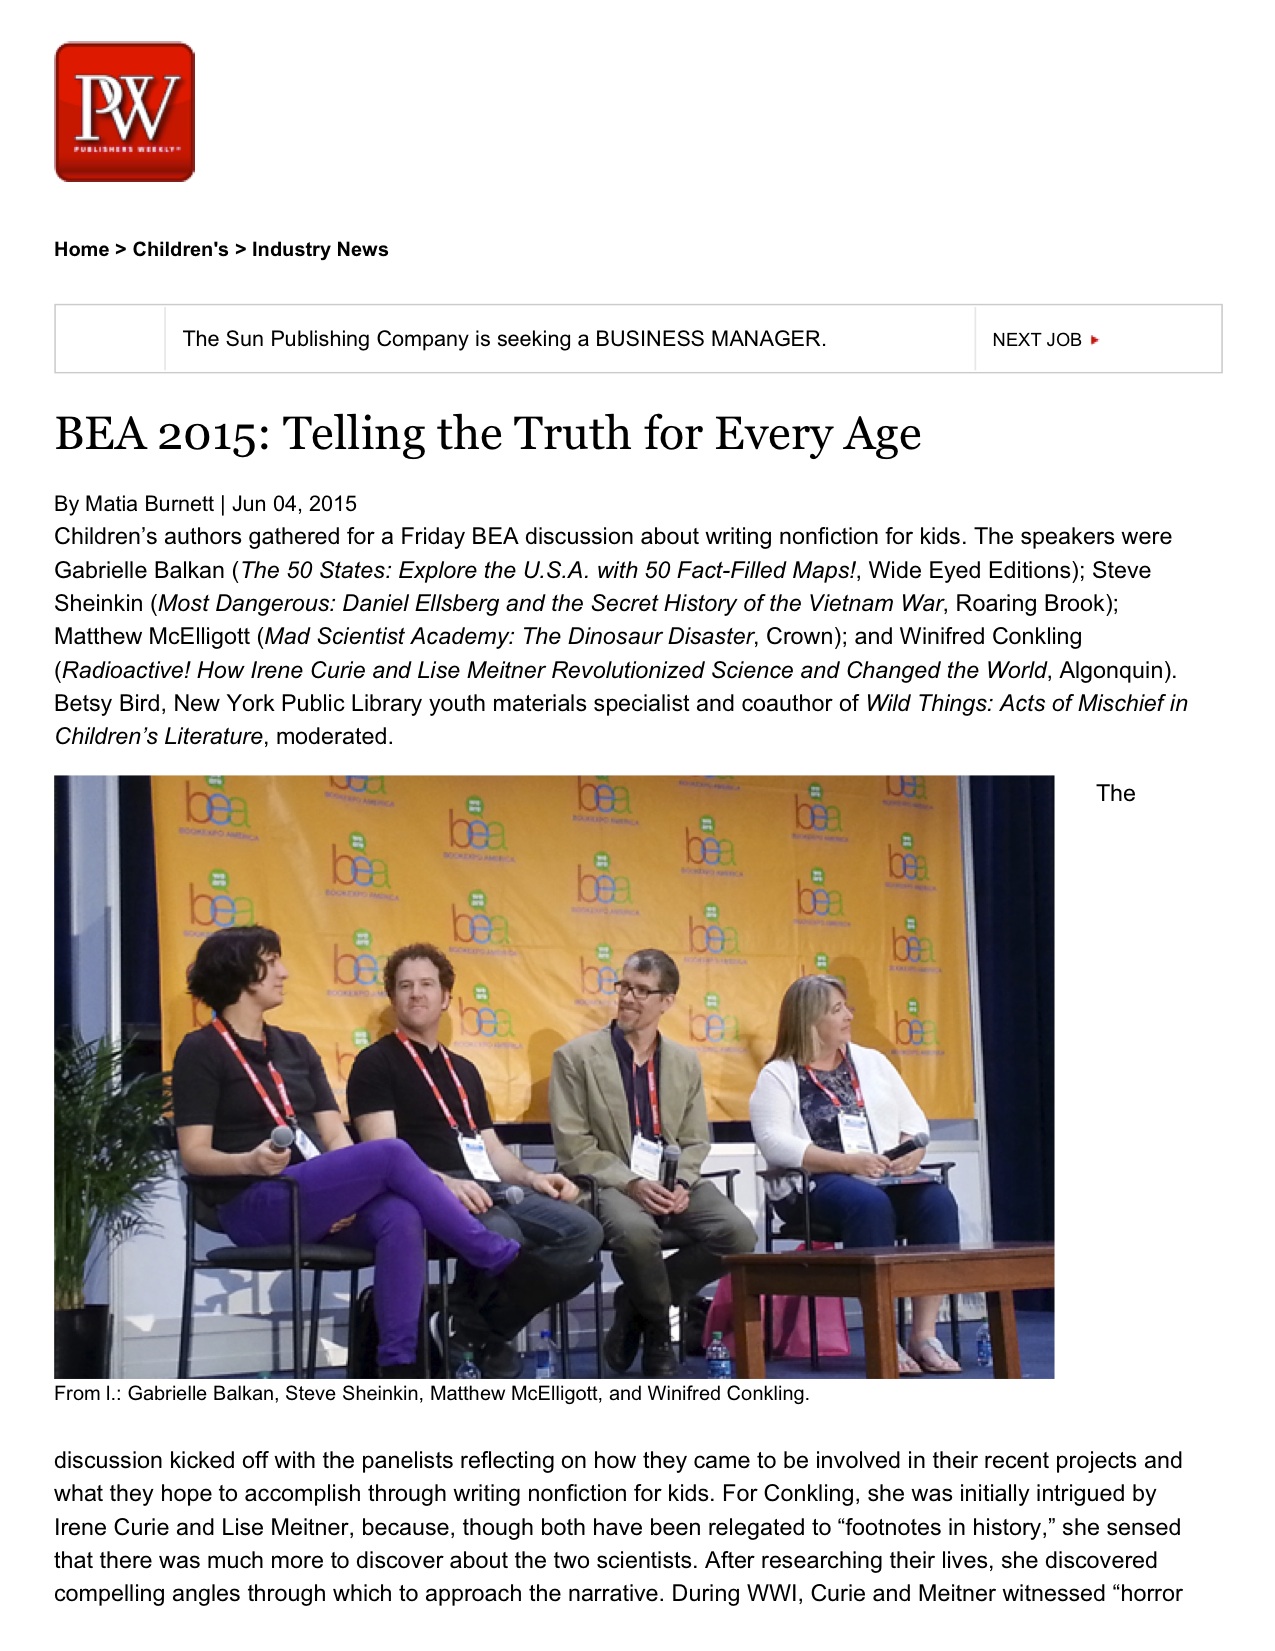 BEA 2015_ Telling the Truth for Every Age.jpg